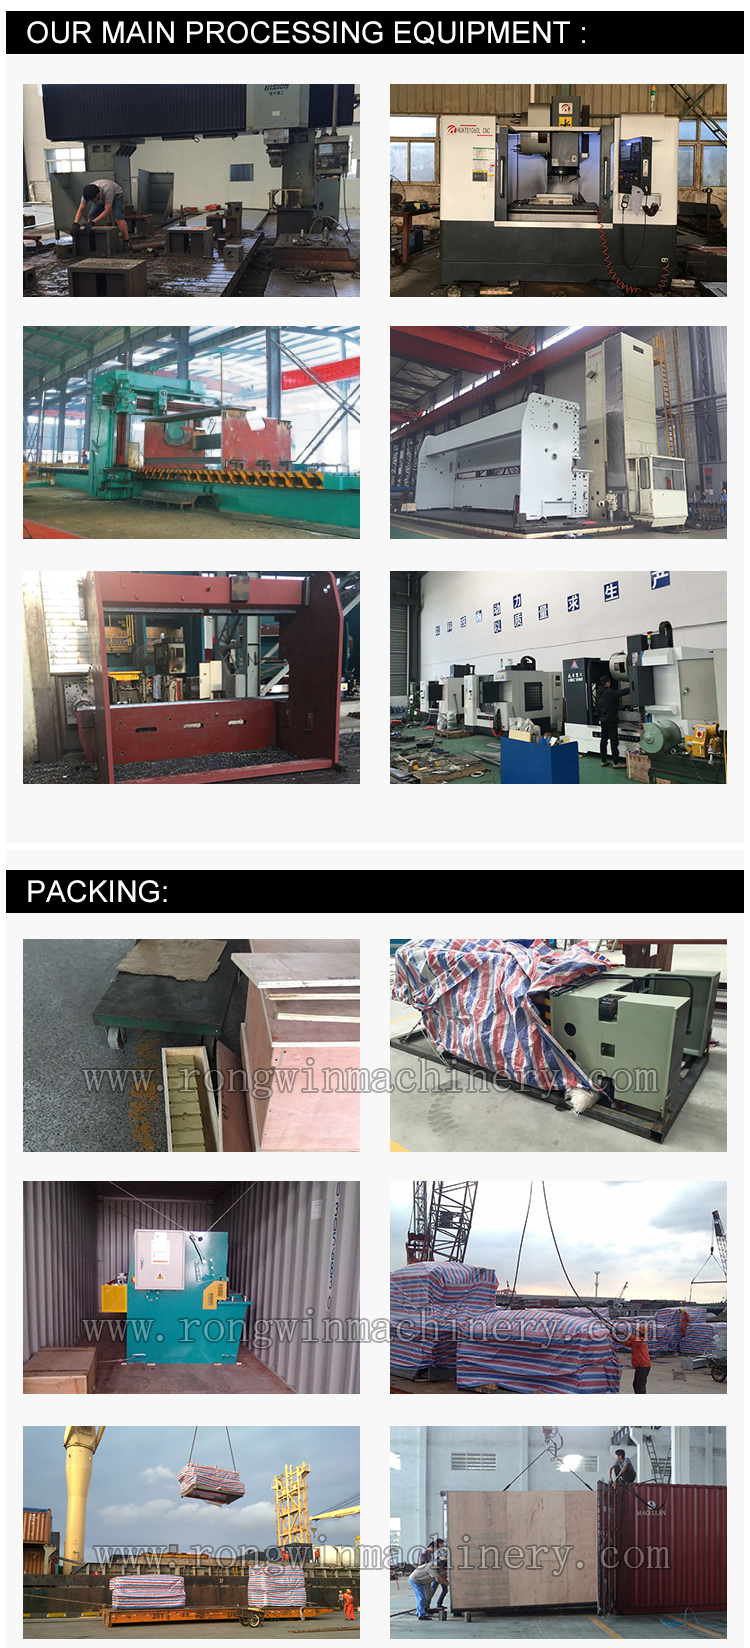 Rongwin guillotine metal cutting machine from China for related industries-23